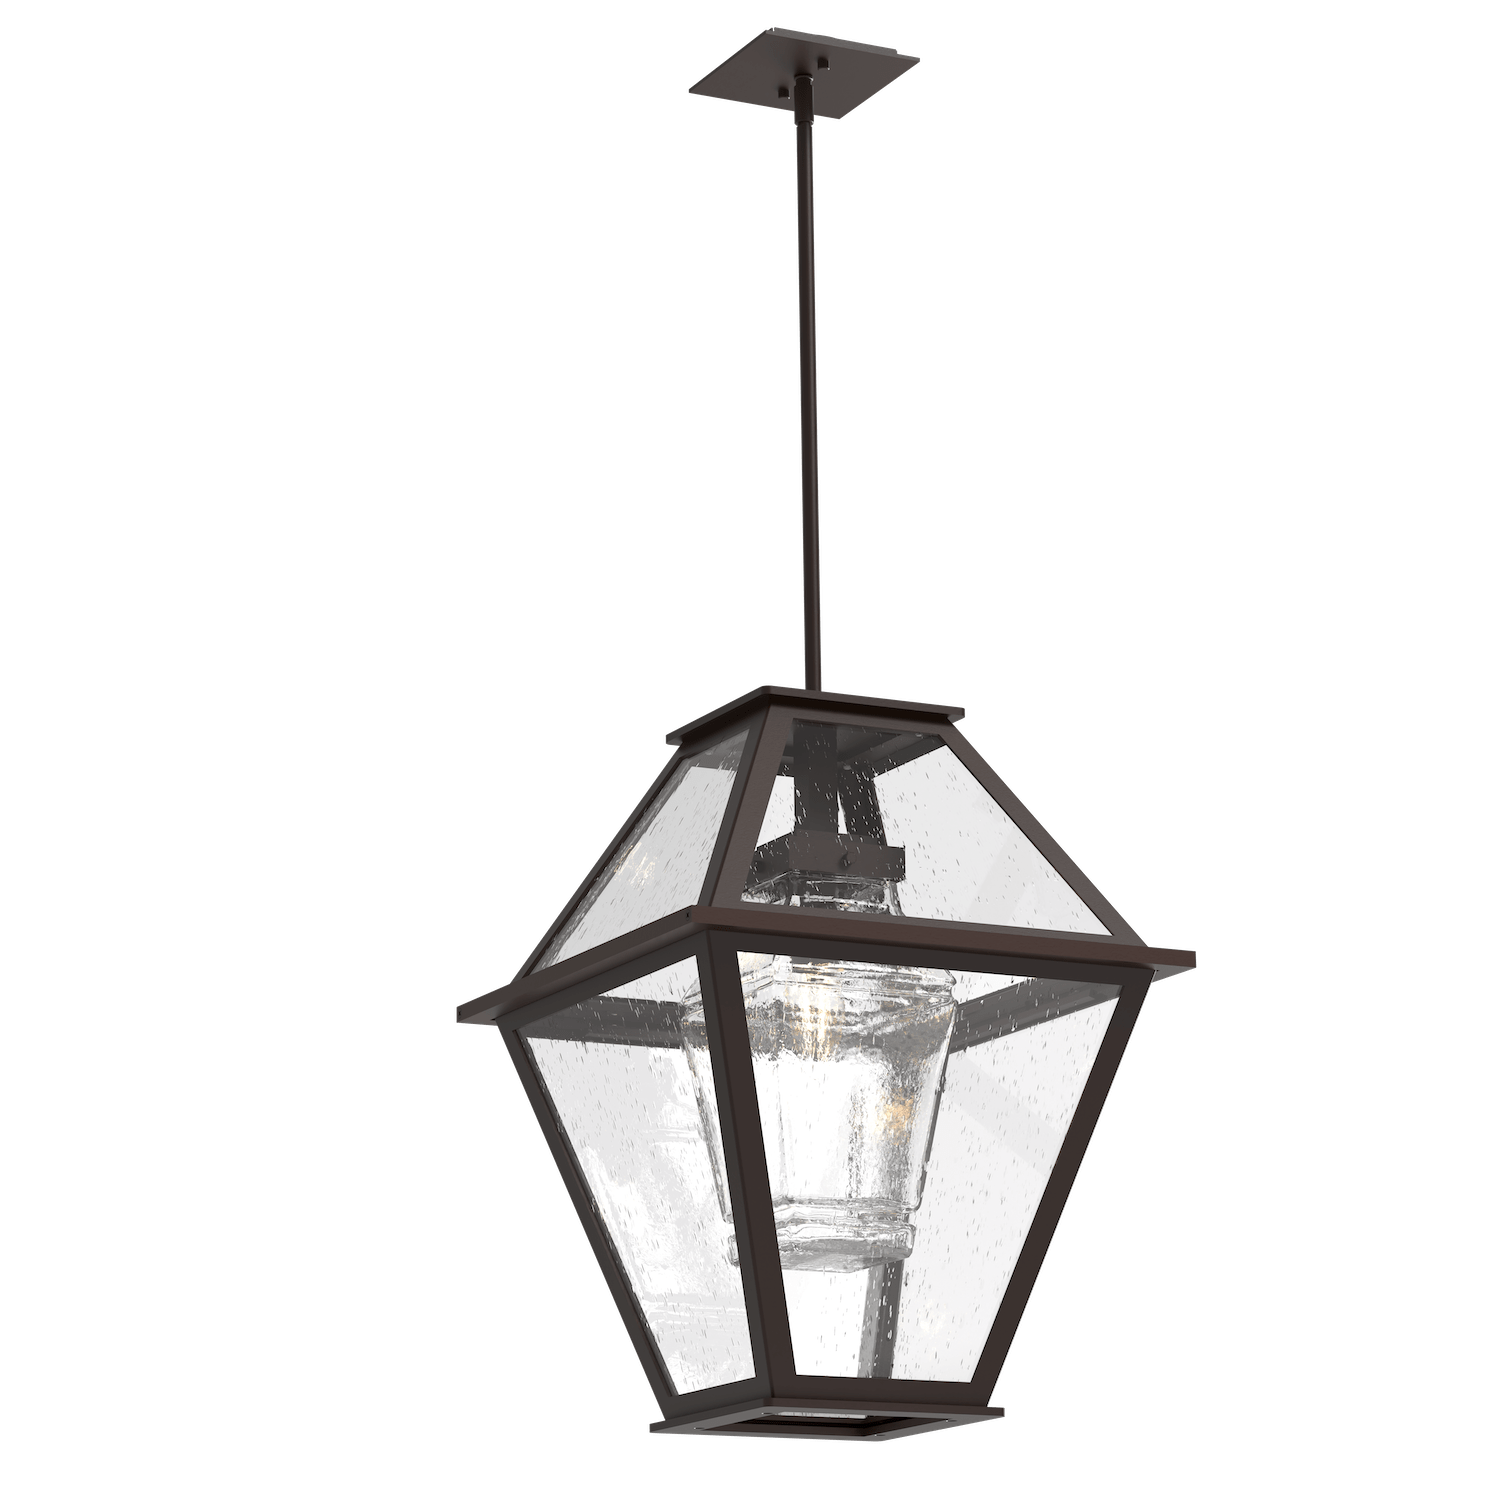 OPB0072-01-SB-C-Hammerton-Studio-Terrace-24-inch-outdoor-nested-pendant-light-with-statuary-bronze-finish-and-clear-blown-glass-shades-and-incandescent-lamping